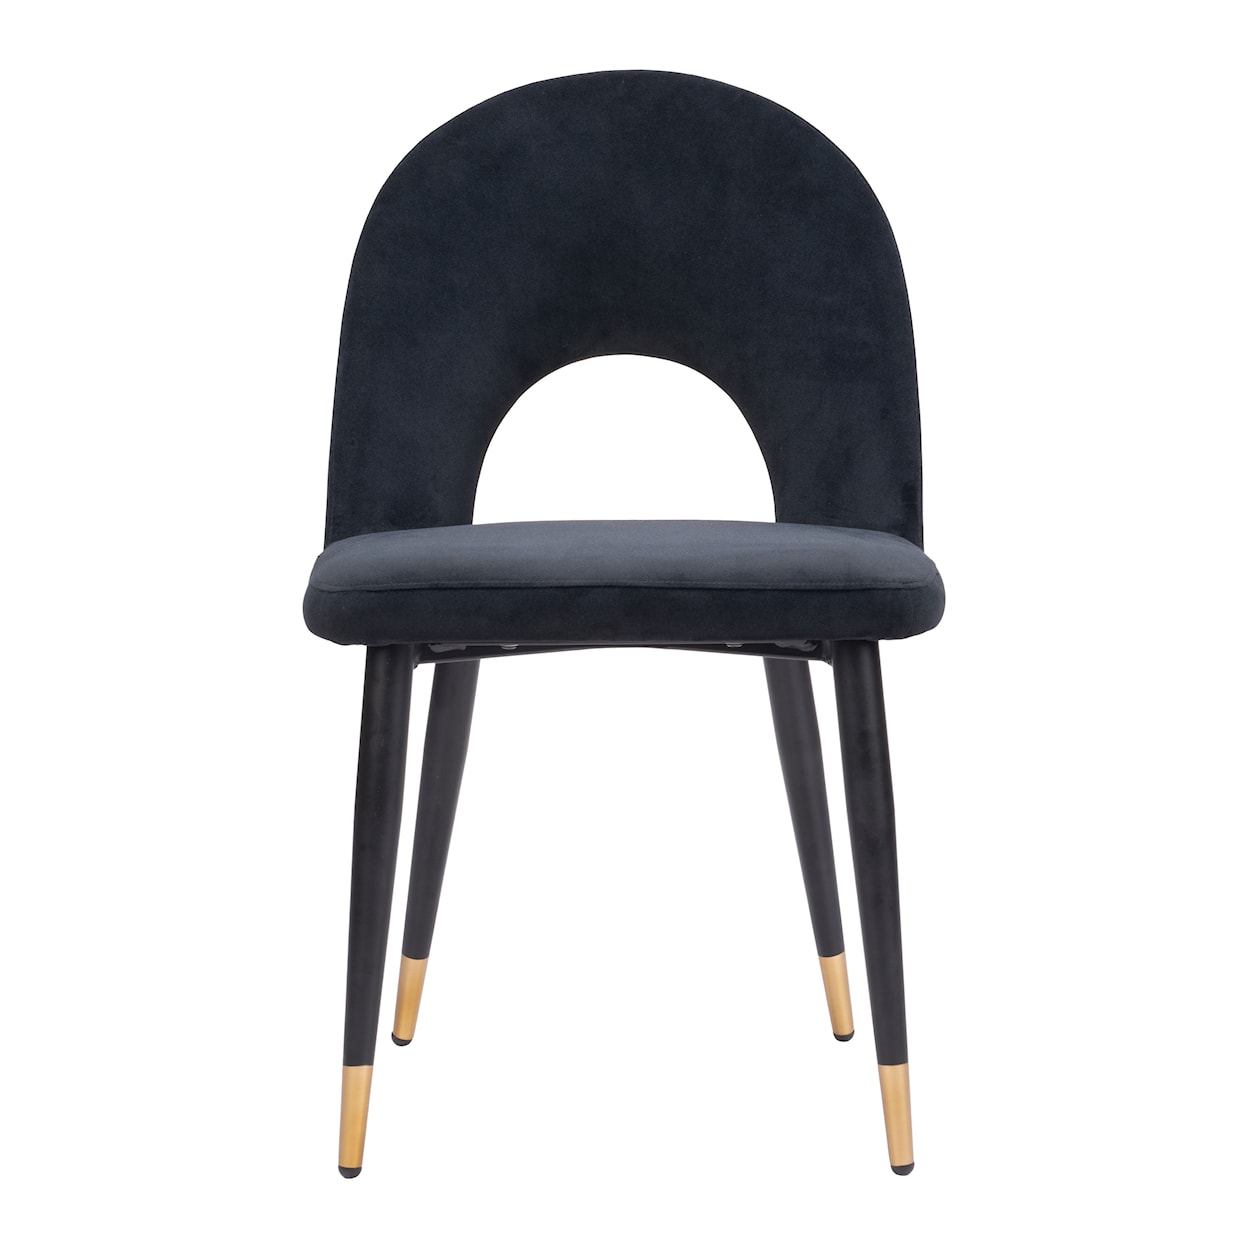 Zuo Menlo Collection Dining Chair